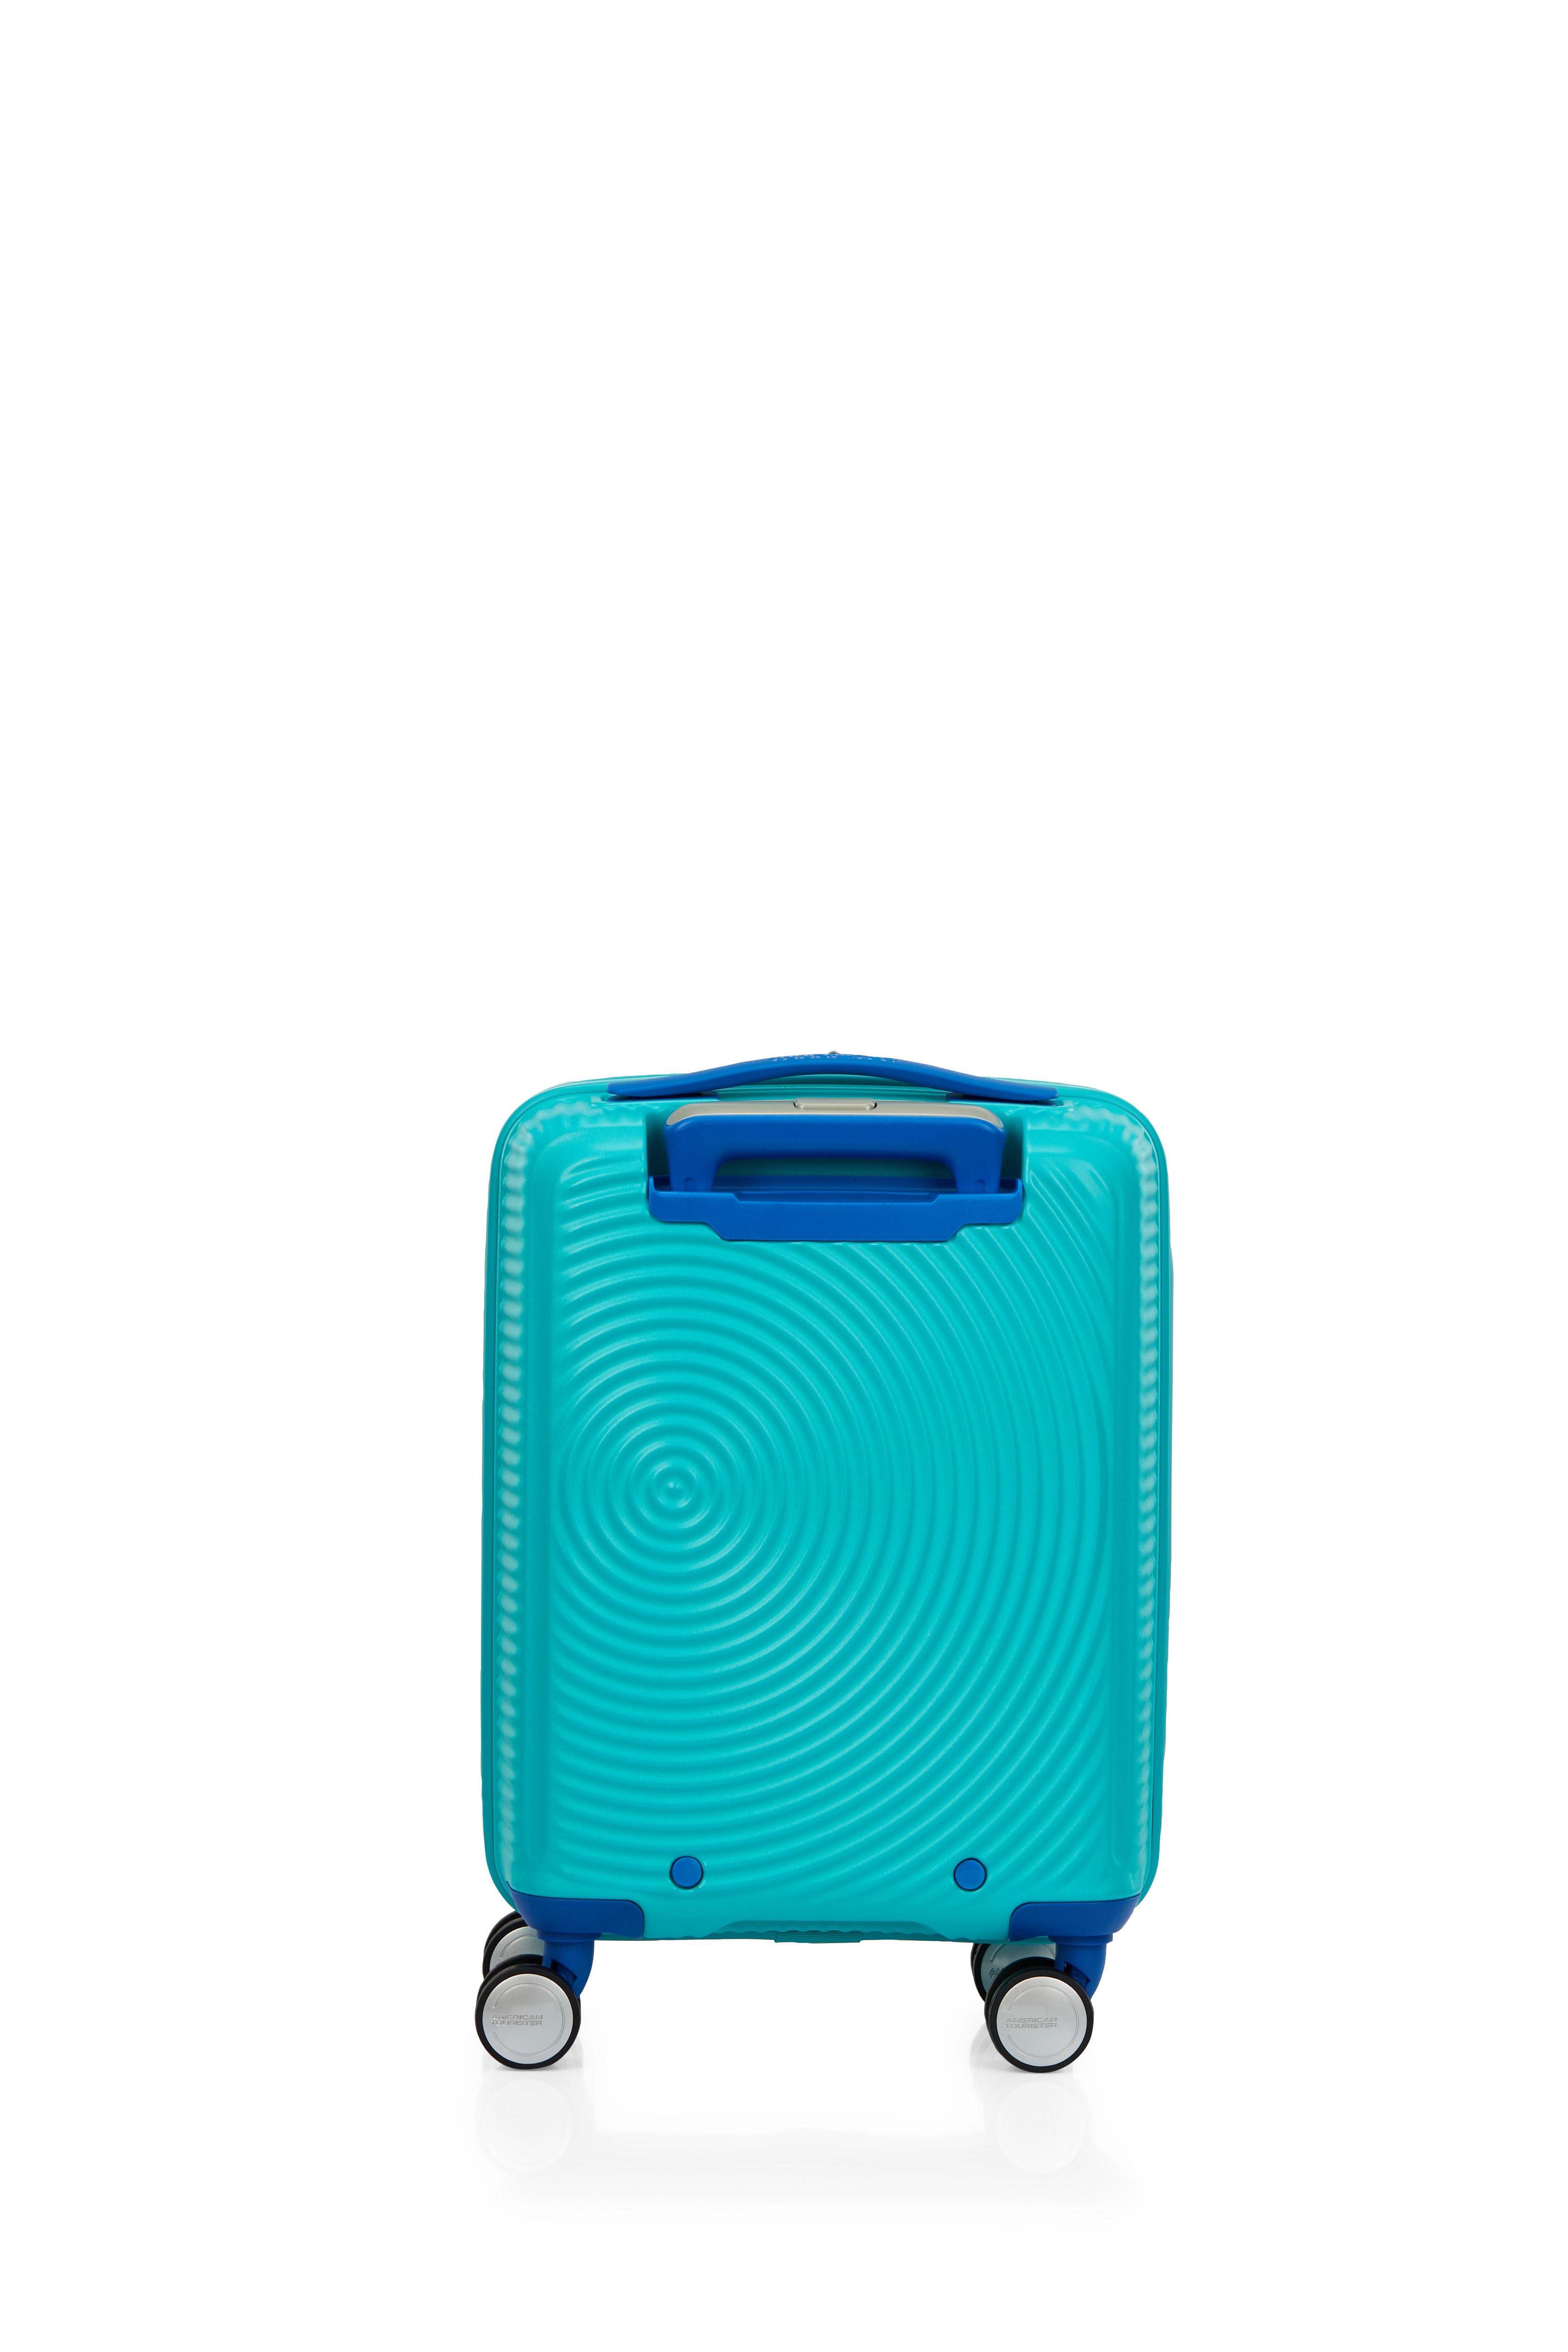 American Tourister - Little Curio 47cm Spinner - Teal/Blue-4